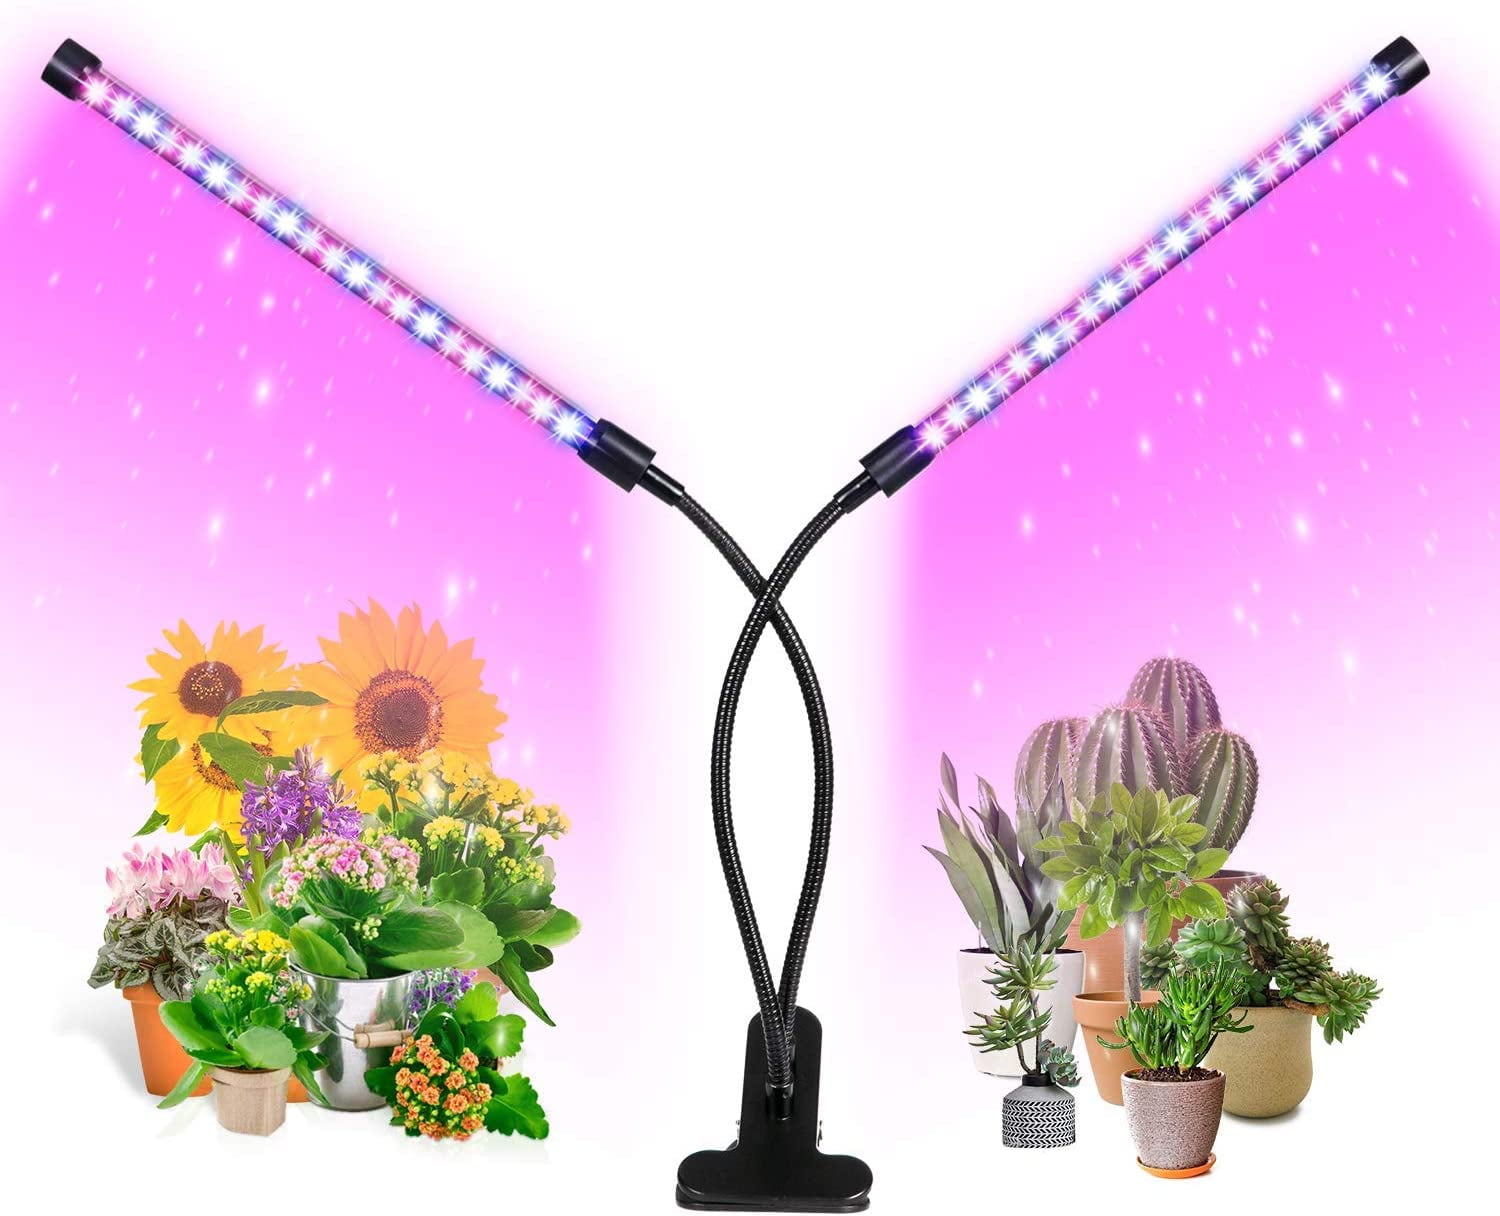 5V USB LED Strip Grow Light Dimmable Plant Grow Lamp For Plant Veg Hydroponic US 